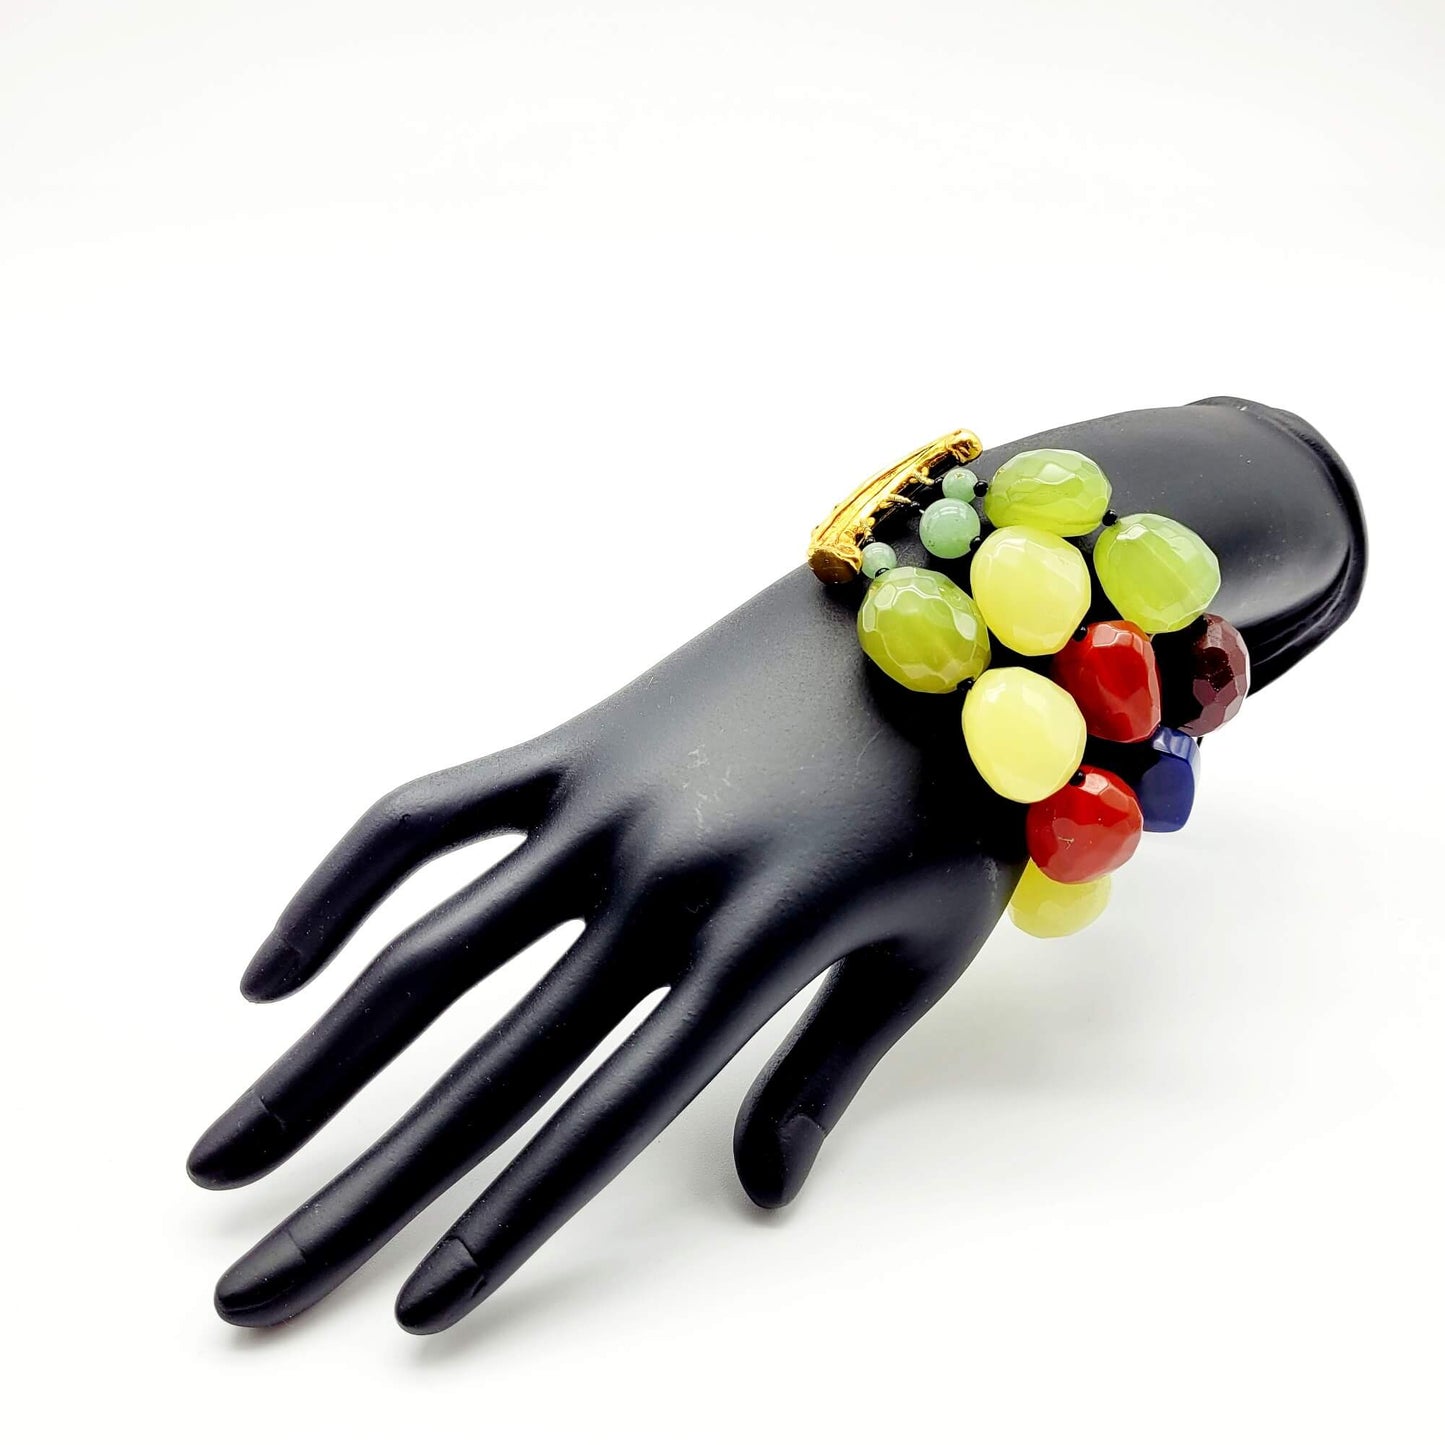 A vintage bracelet with colorful oversized beads on a black mannequin hand